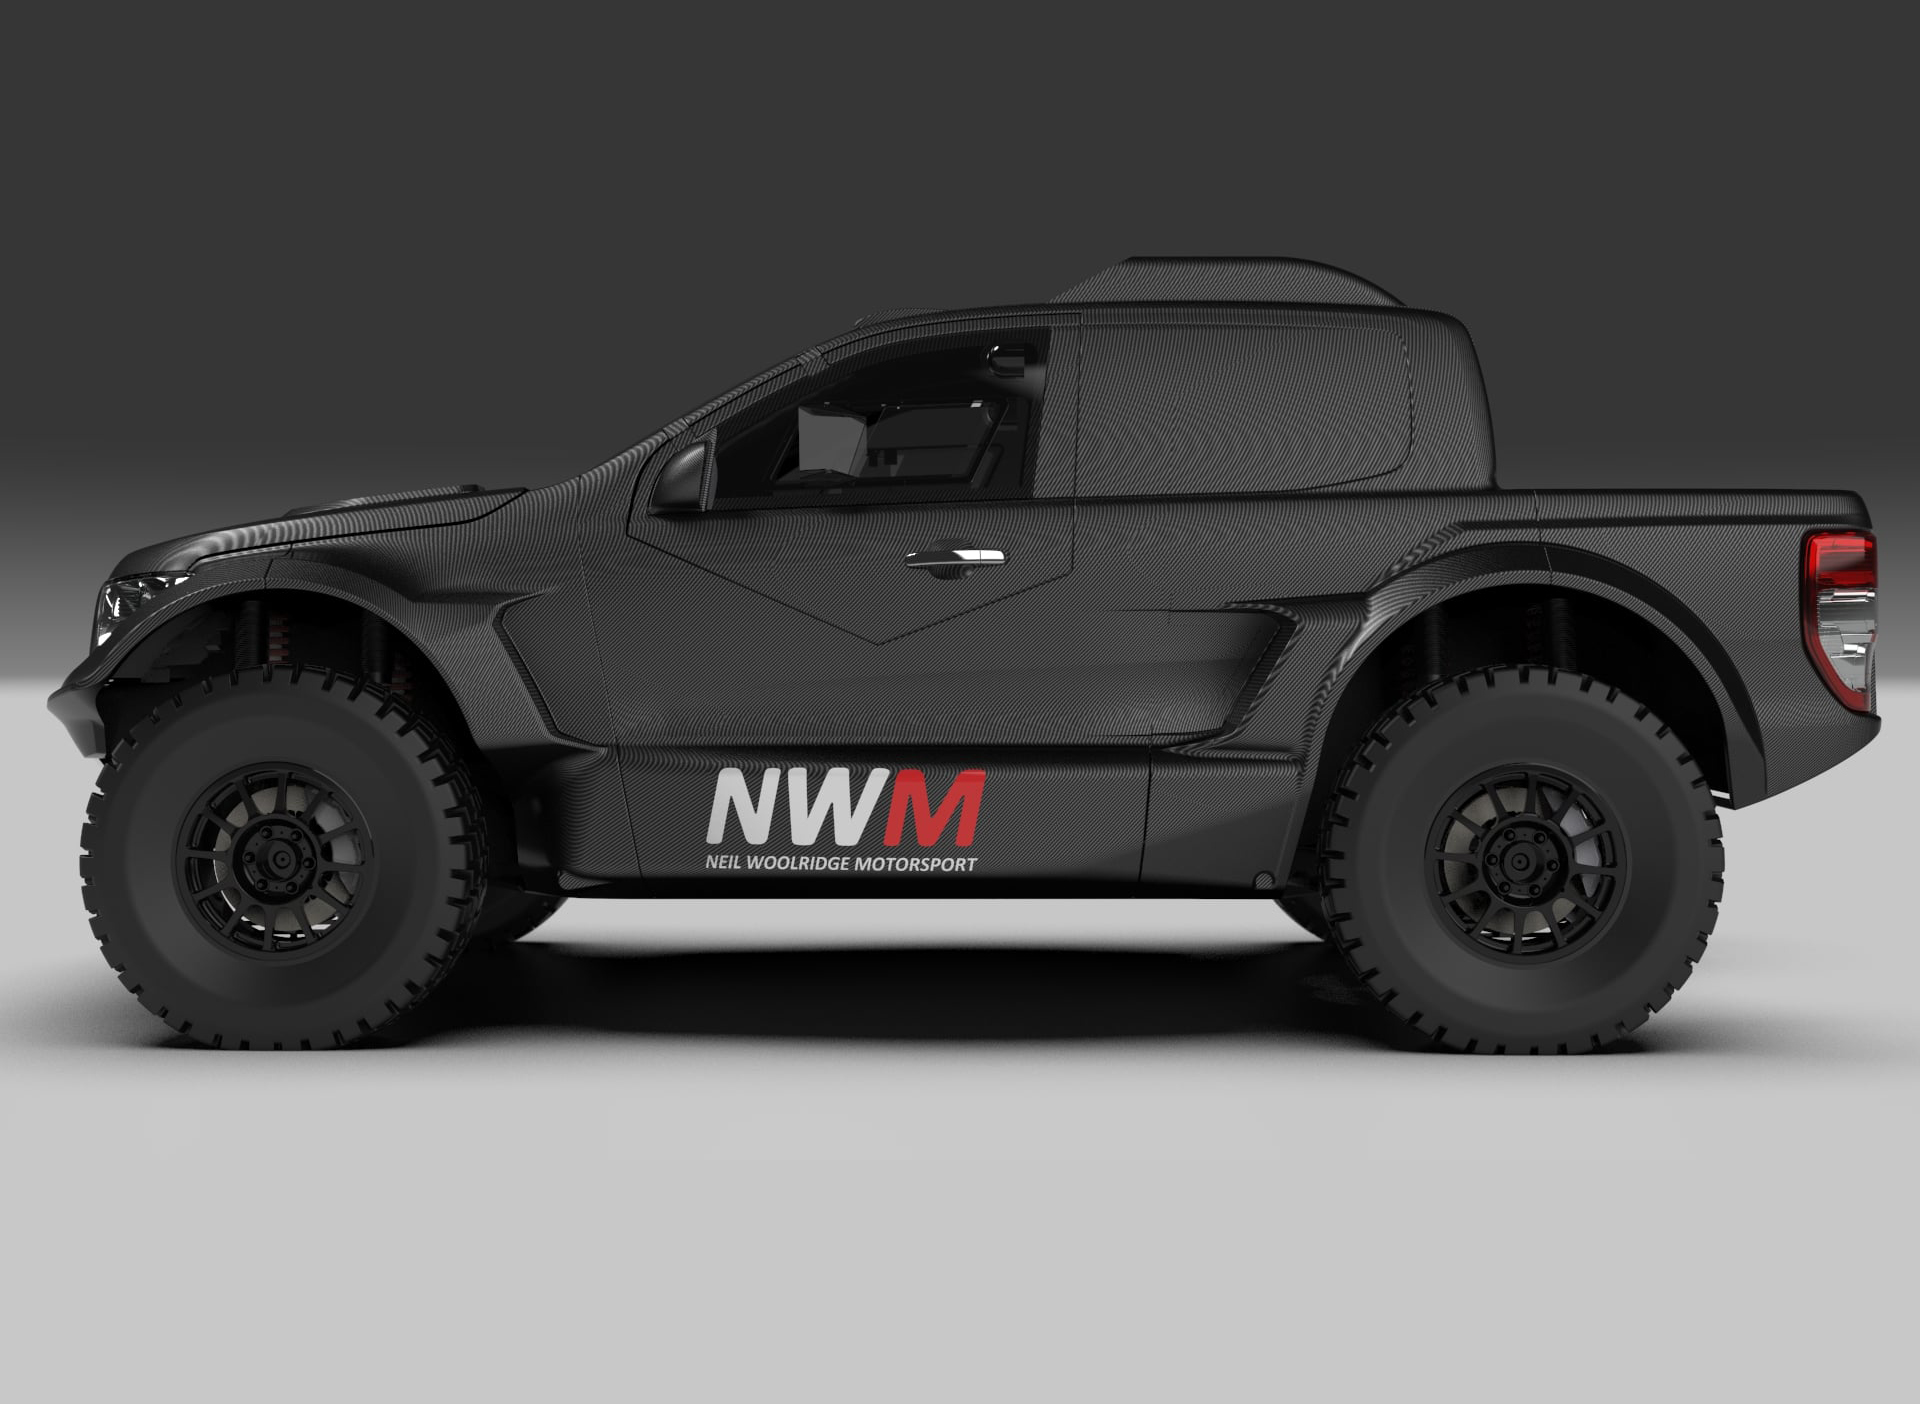 300kW carbon fibre Ford Ranger set for 2022 South African Rally-Raid